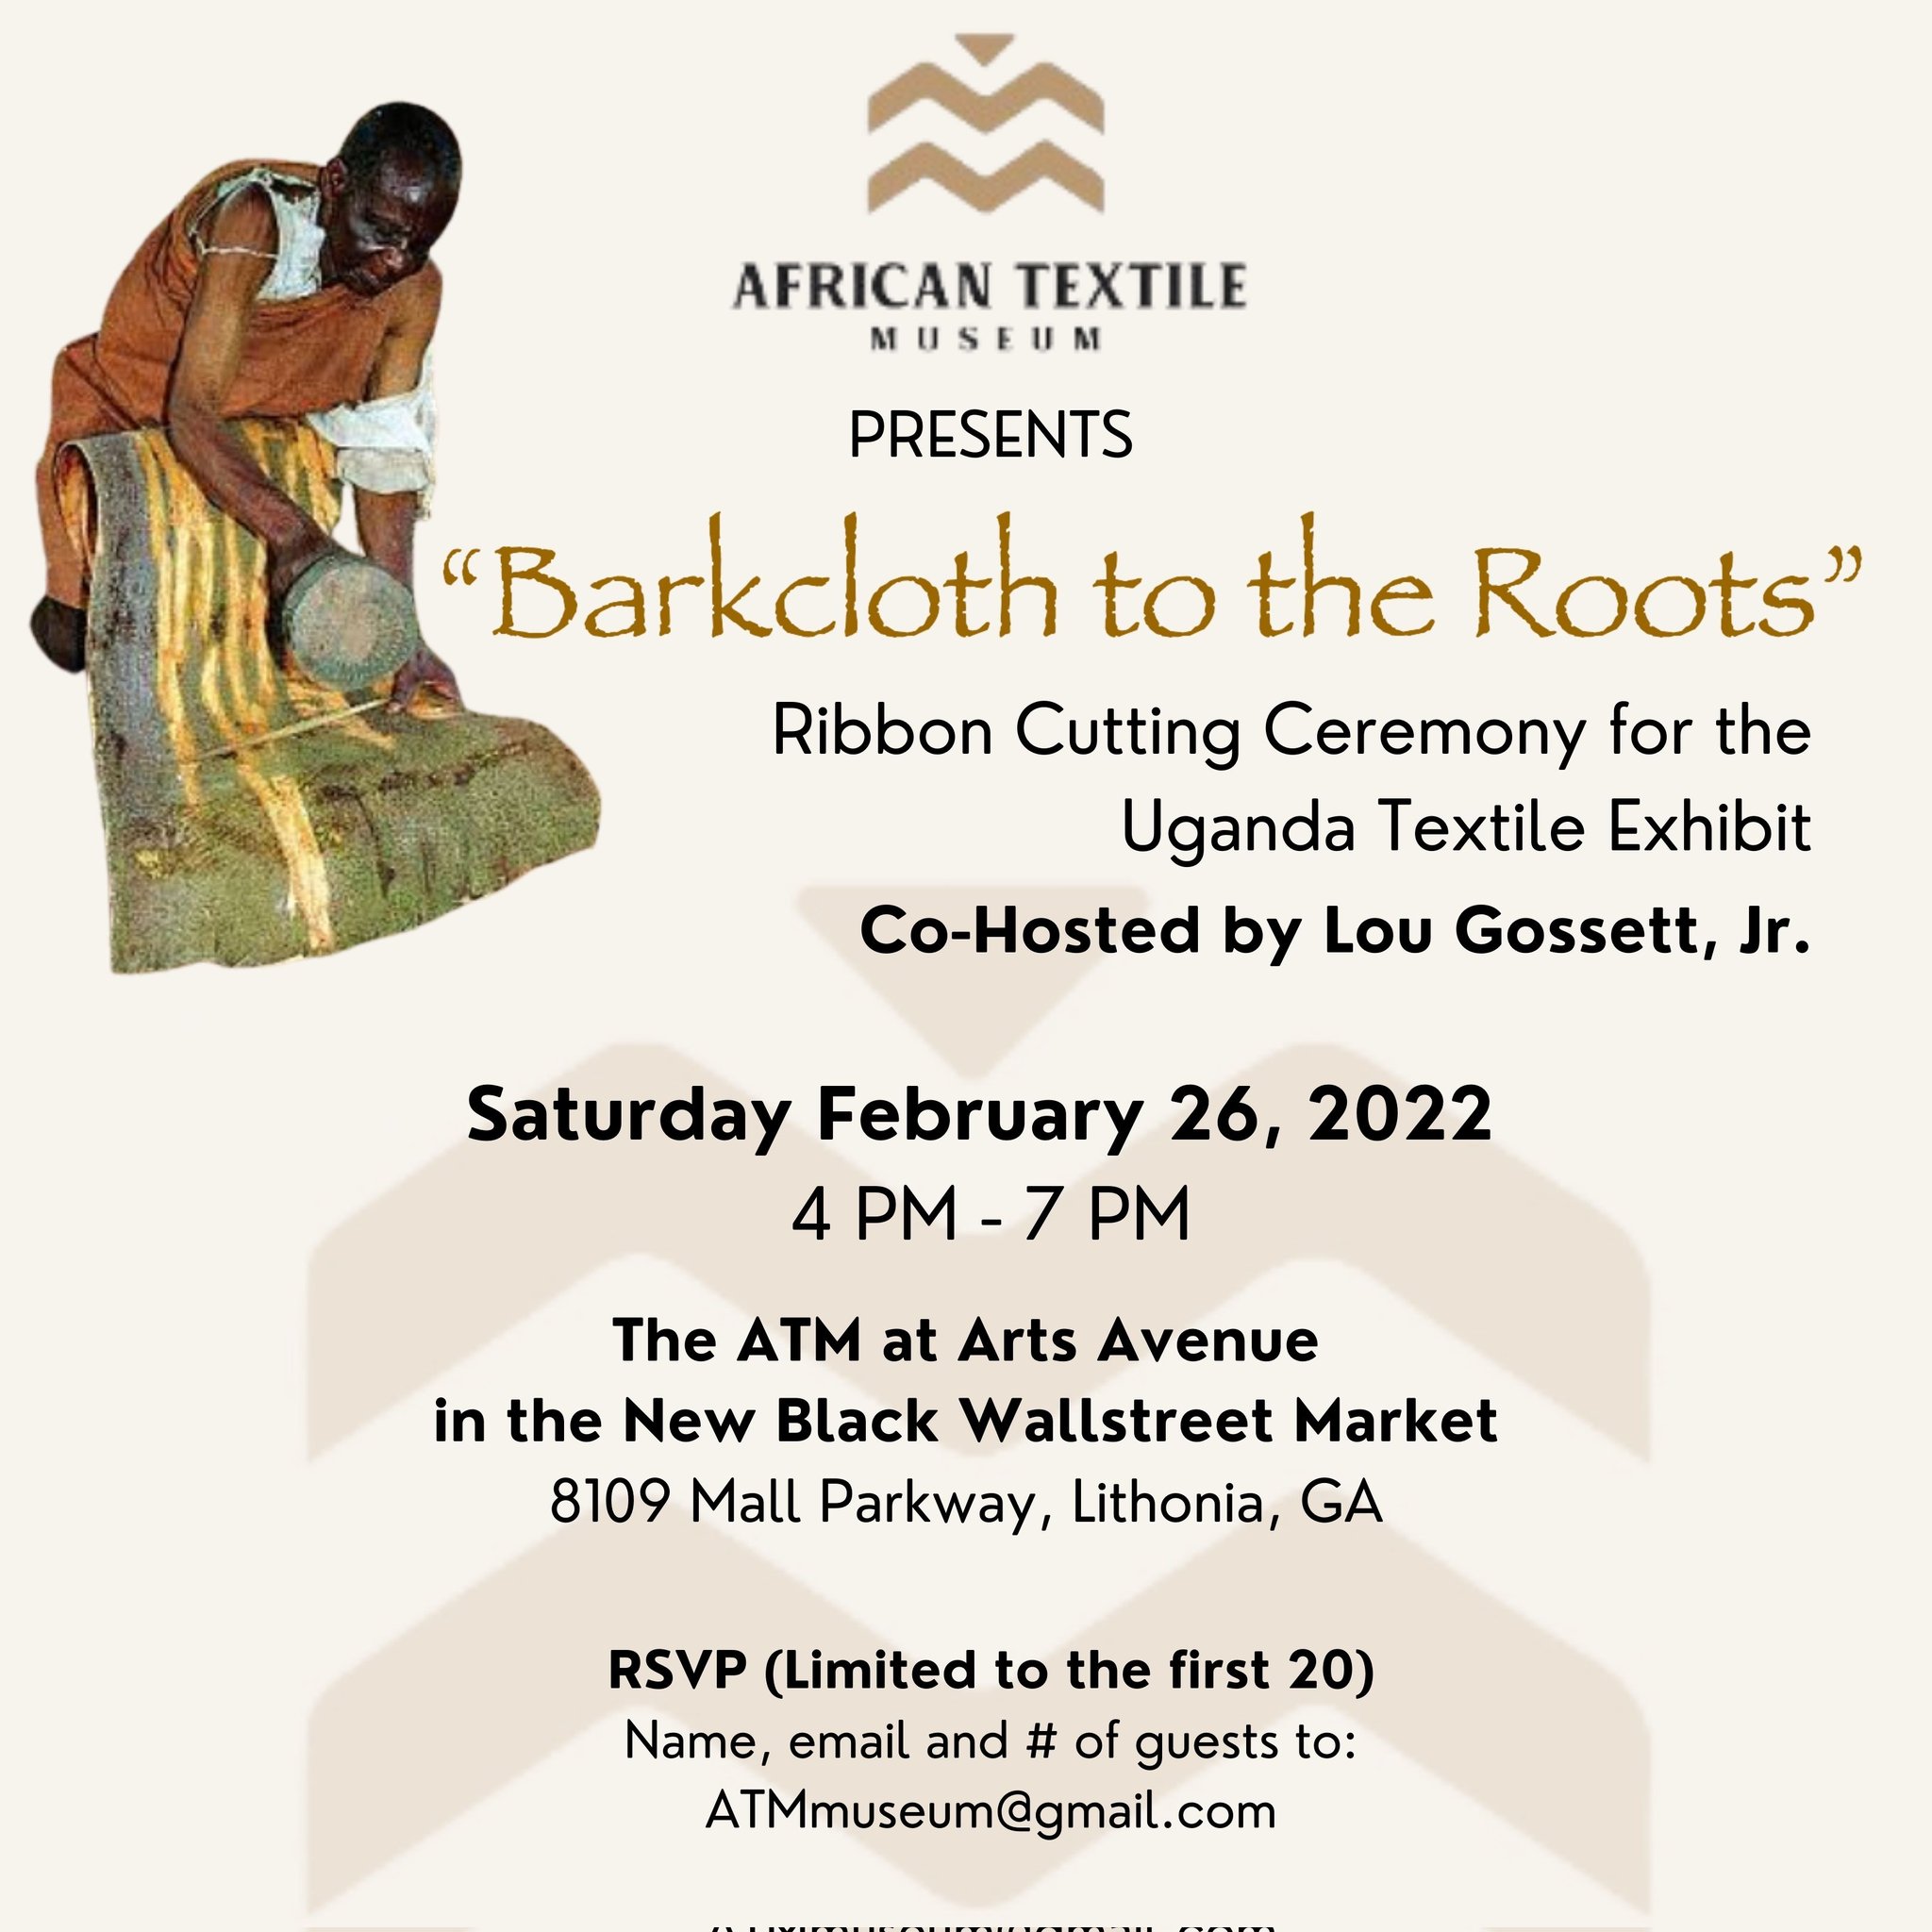 Barkcloth to the Roots